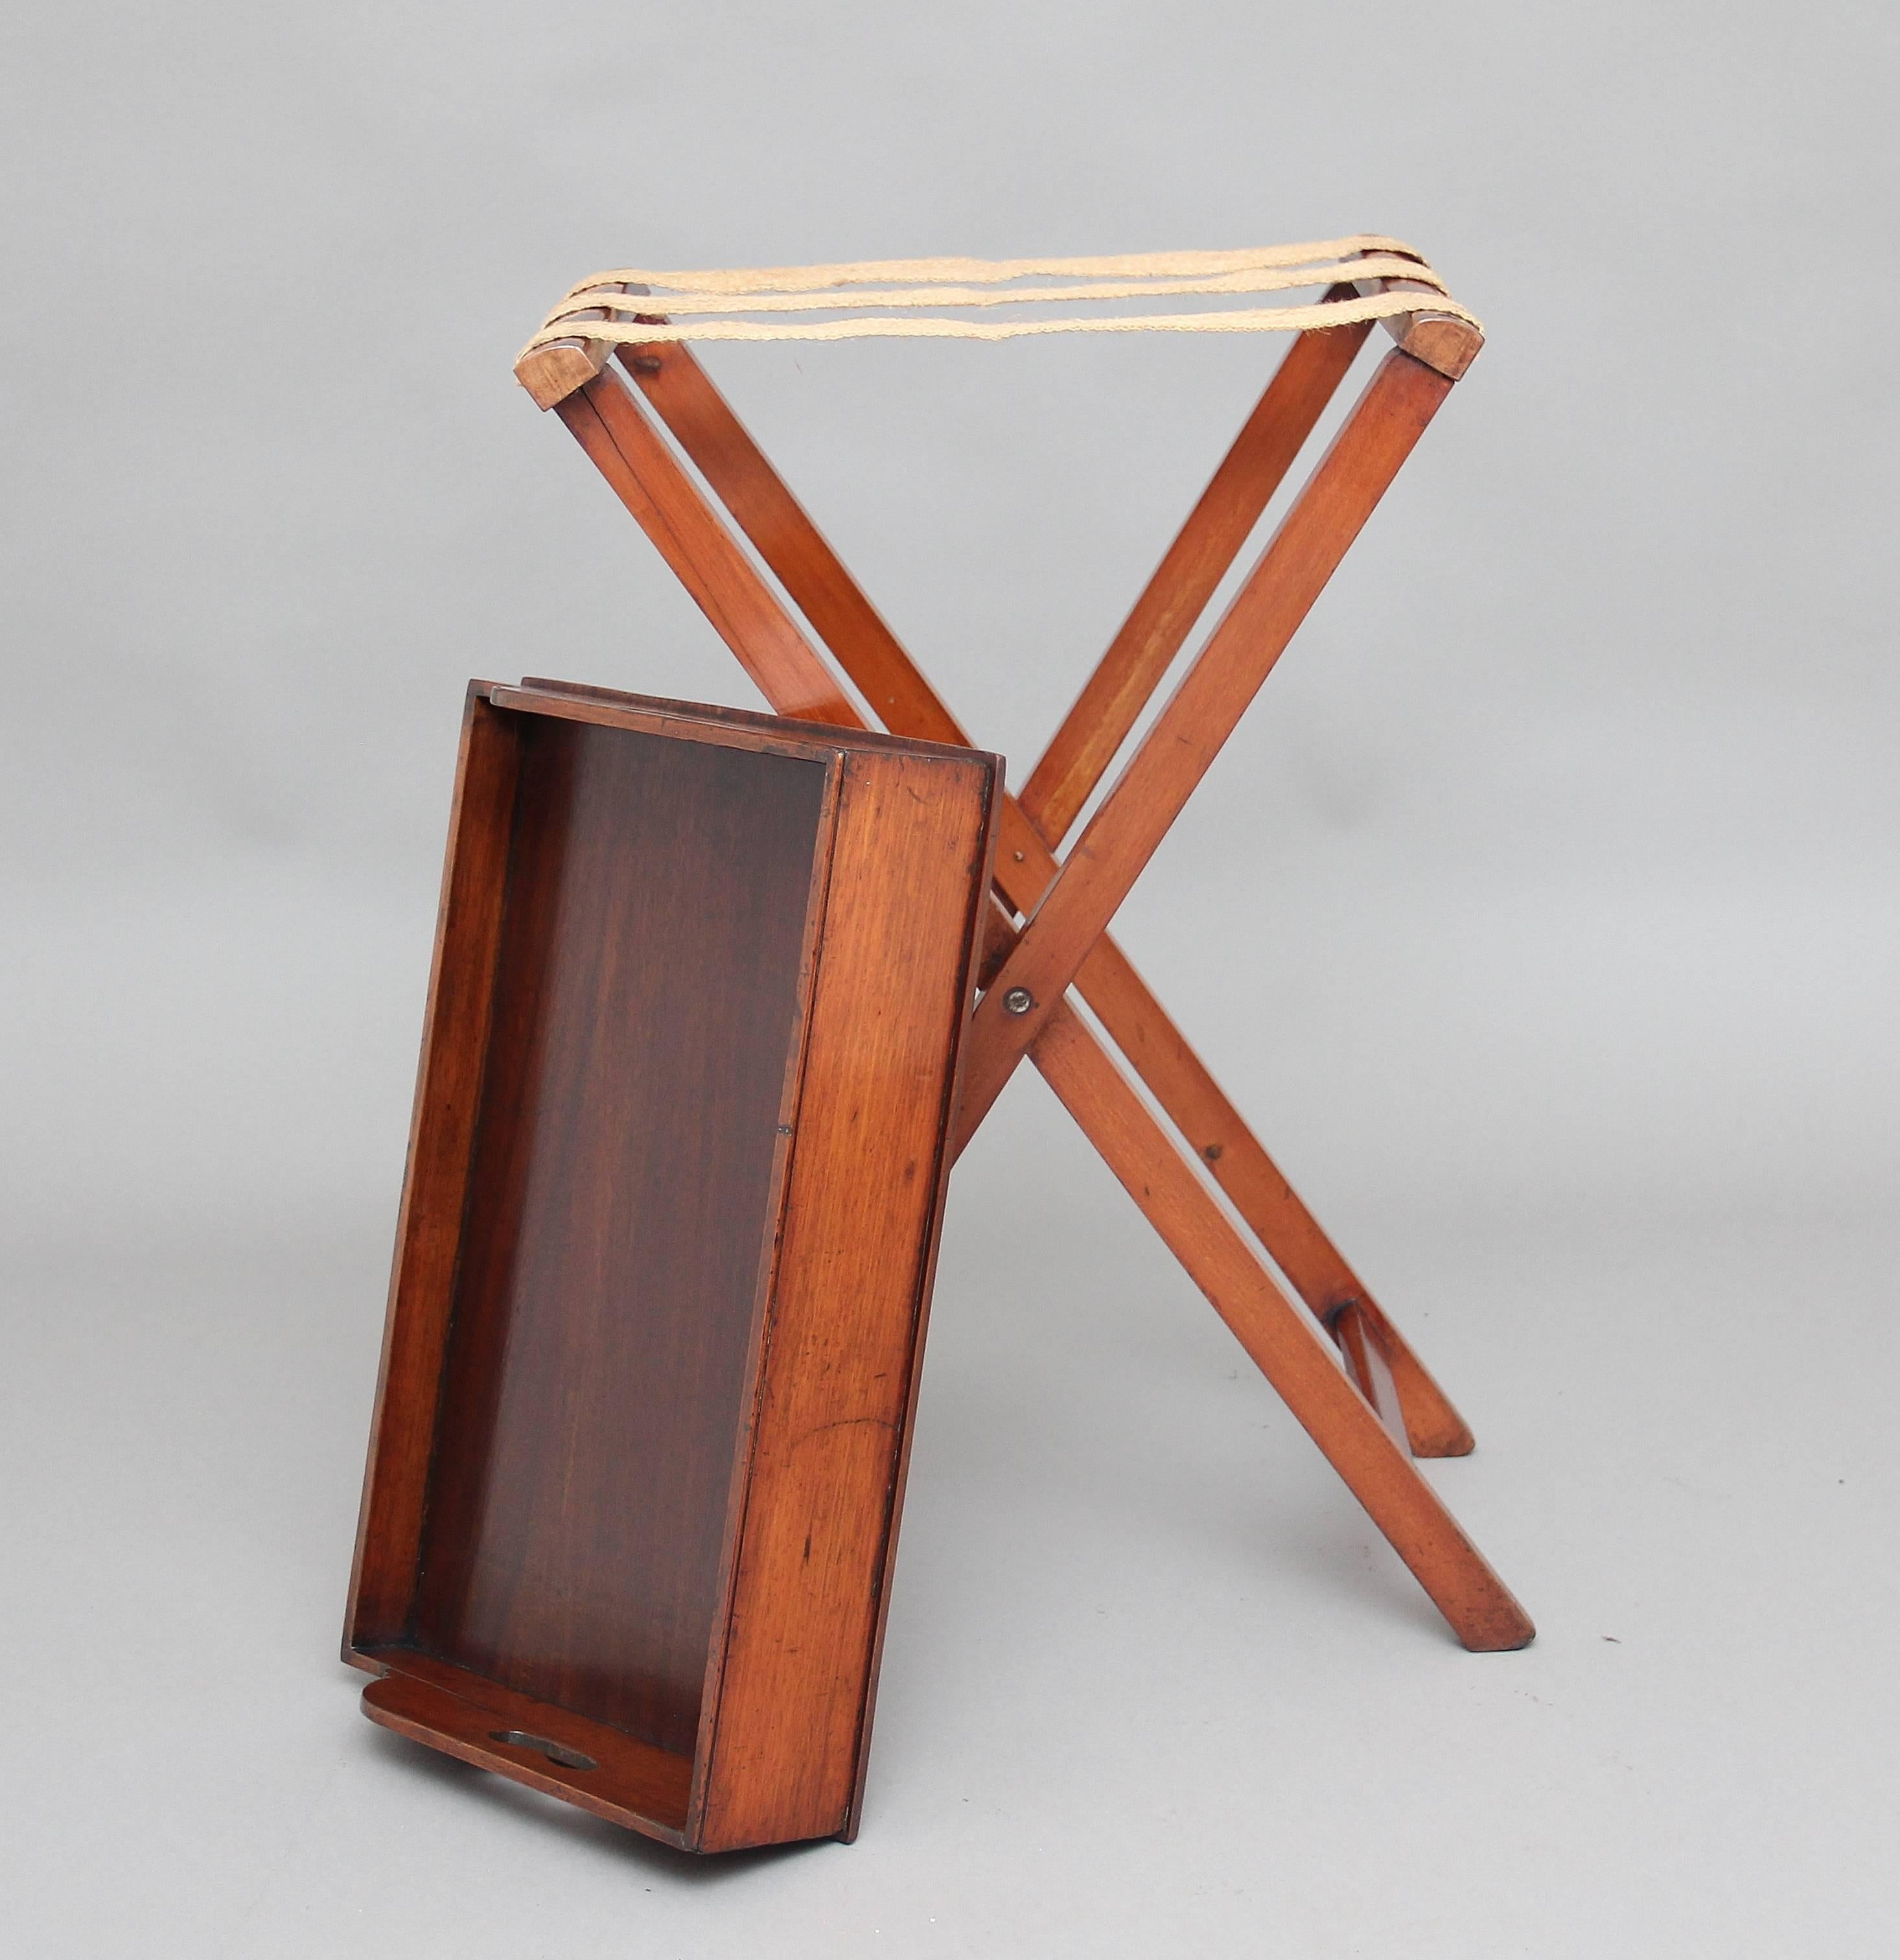 19th century mahogany butlers tray on stand, the rectangular shaped tray with a surround gallery three quarters raised and with two fret cut carrying handles above a folding stand, circa 1880.
     